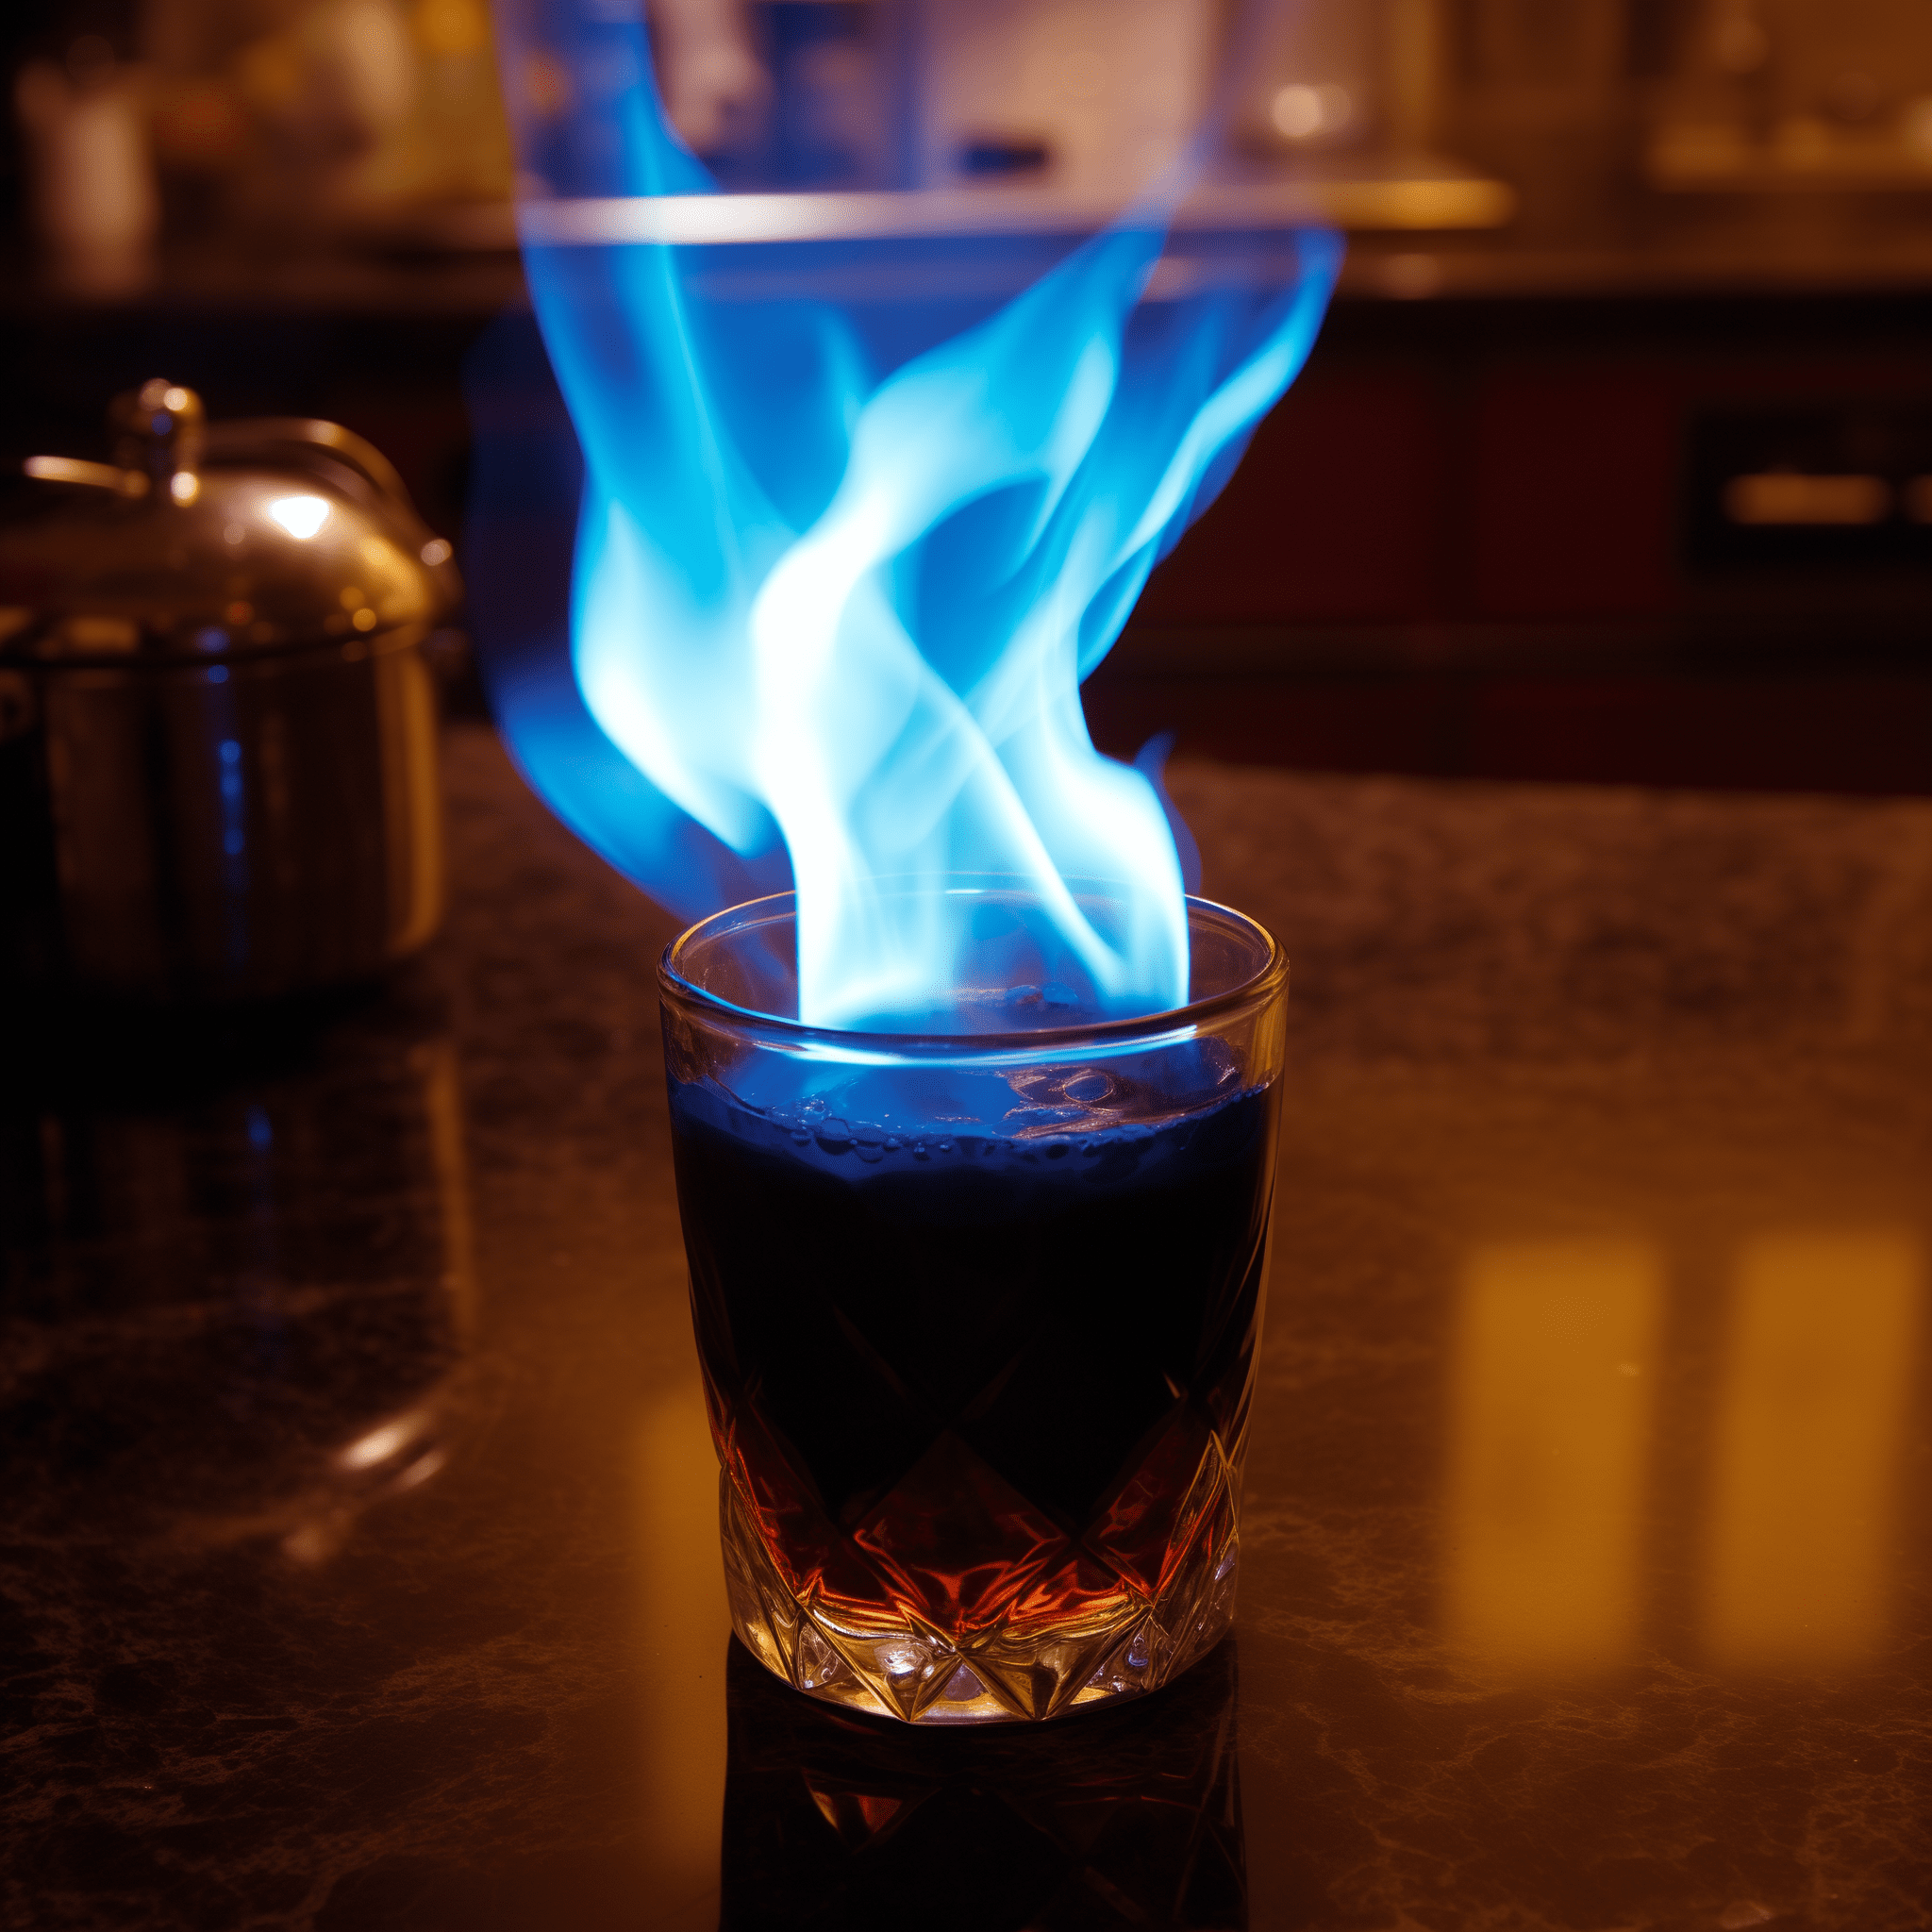 Flaming Blue Jesus Cocktail Recipe - The Flaming Blue Jesus is a potent mix with a complex flavor profile. It's strong and warming, with a peppermint freshness that cuts through the richness of the Southern Comfort and the sharpness of the vodka and tequila. The fiery element adds a smoky note if you let it burn just a bit before blowing it out.